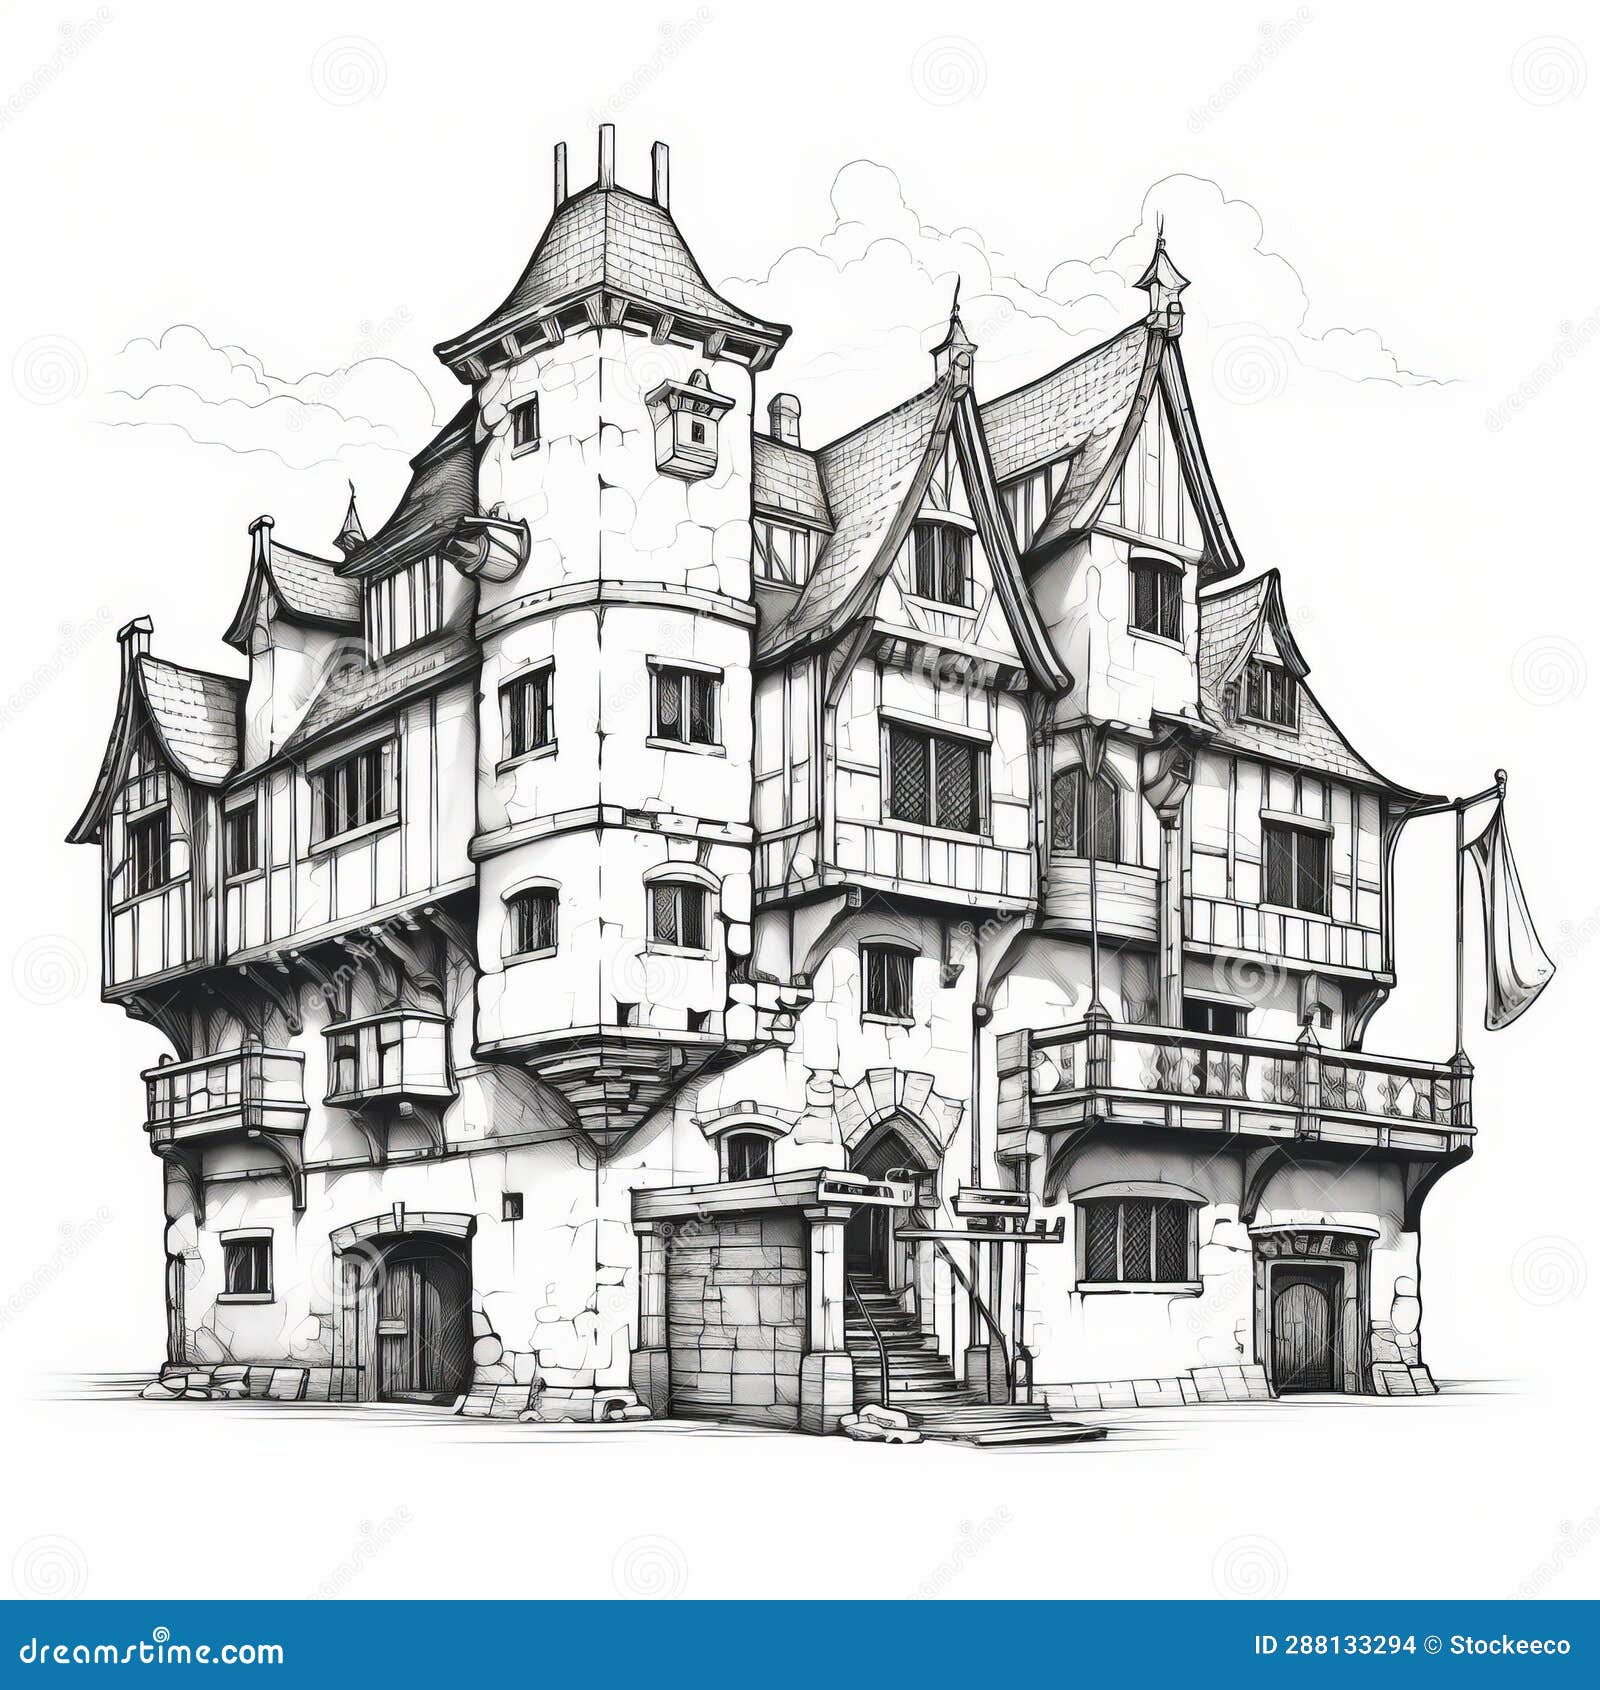 Medieval-inspired Renaissance Mansion Sketch with Comic Book Art Style ...